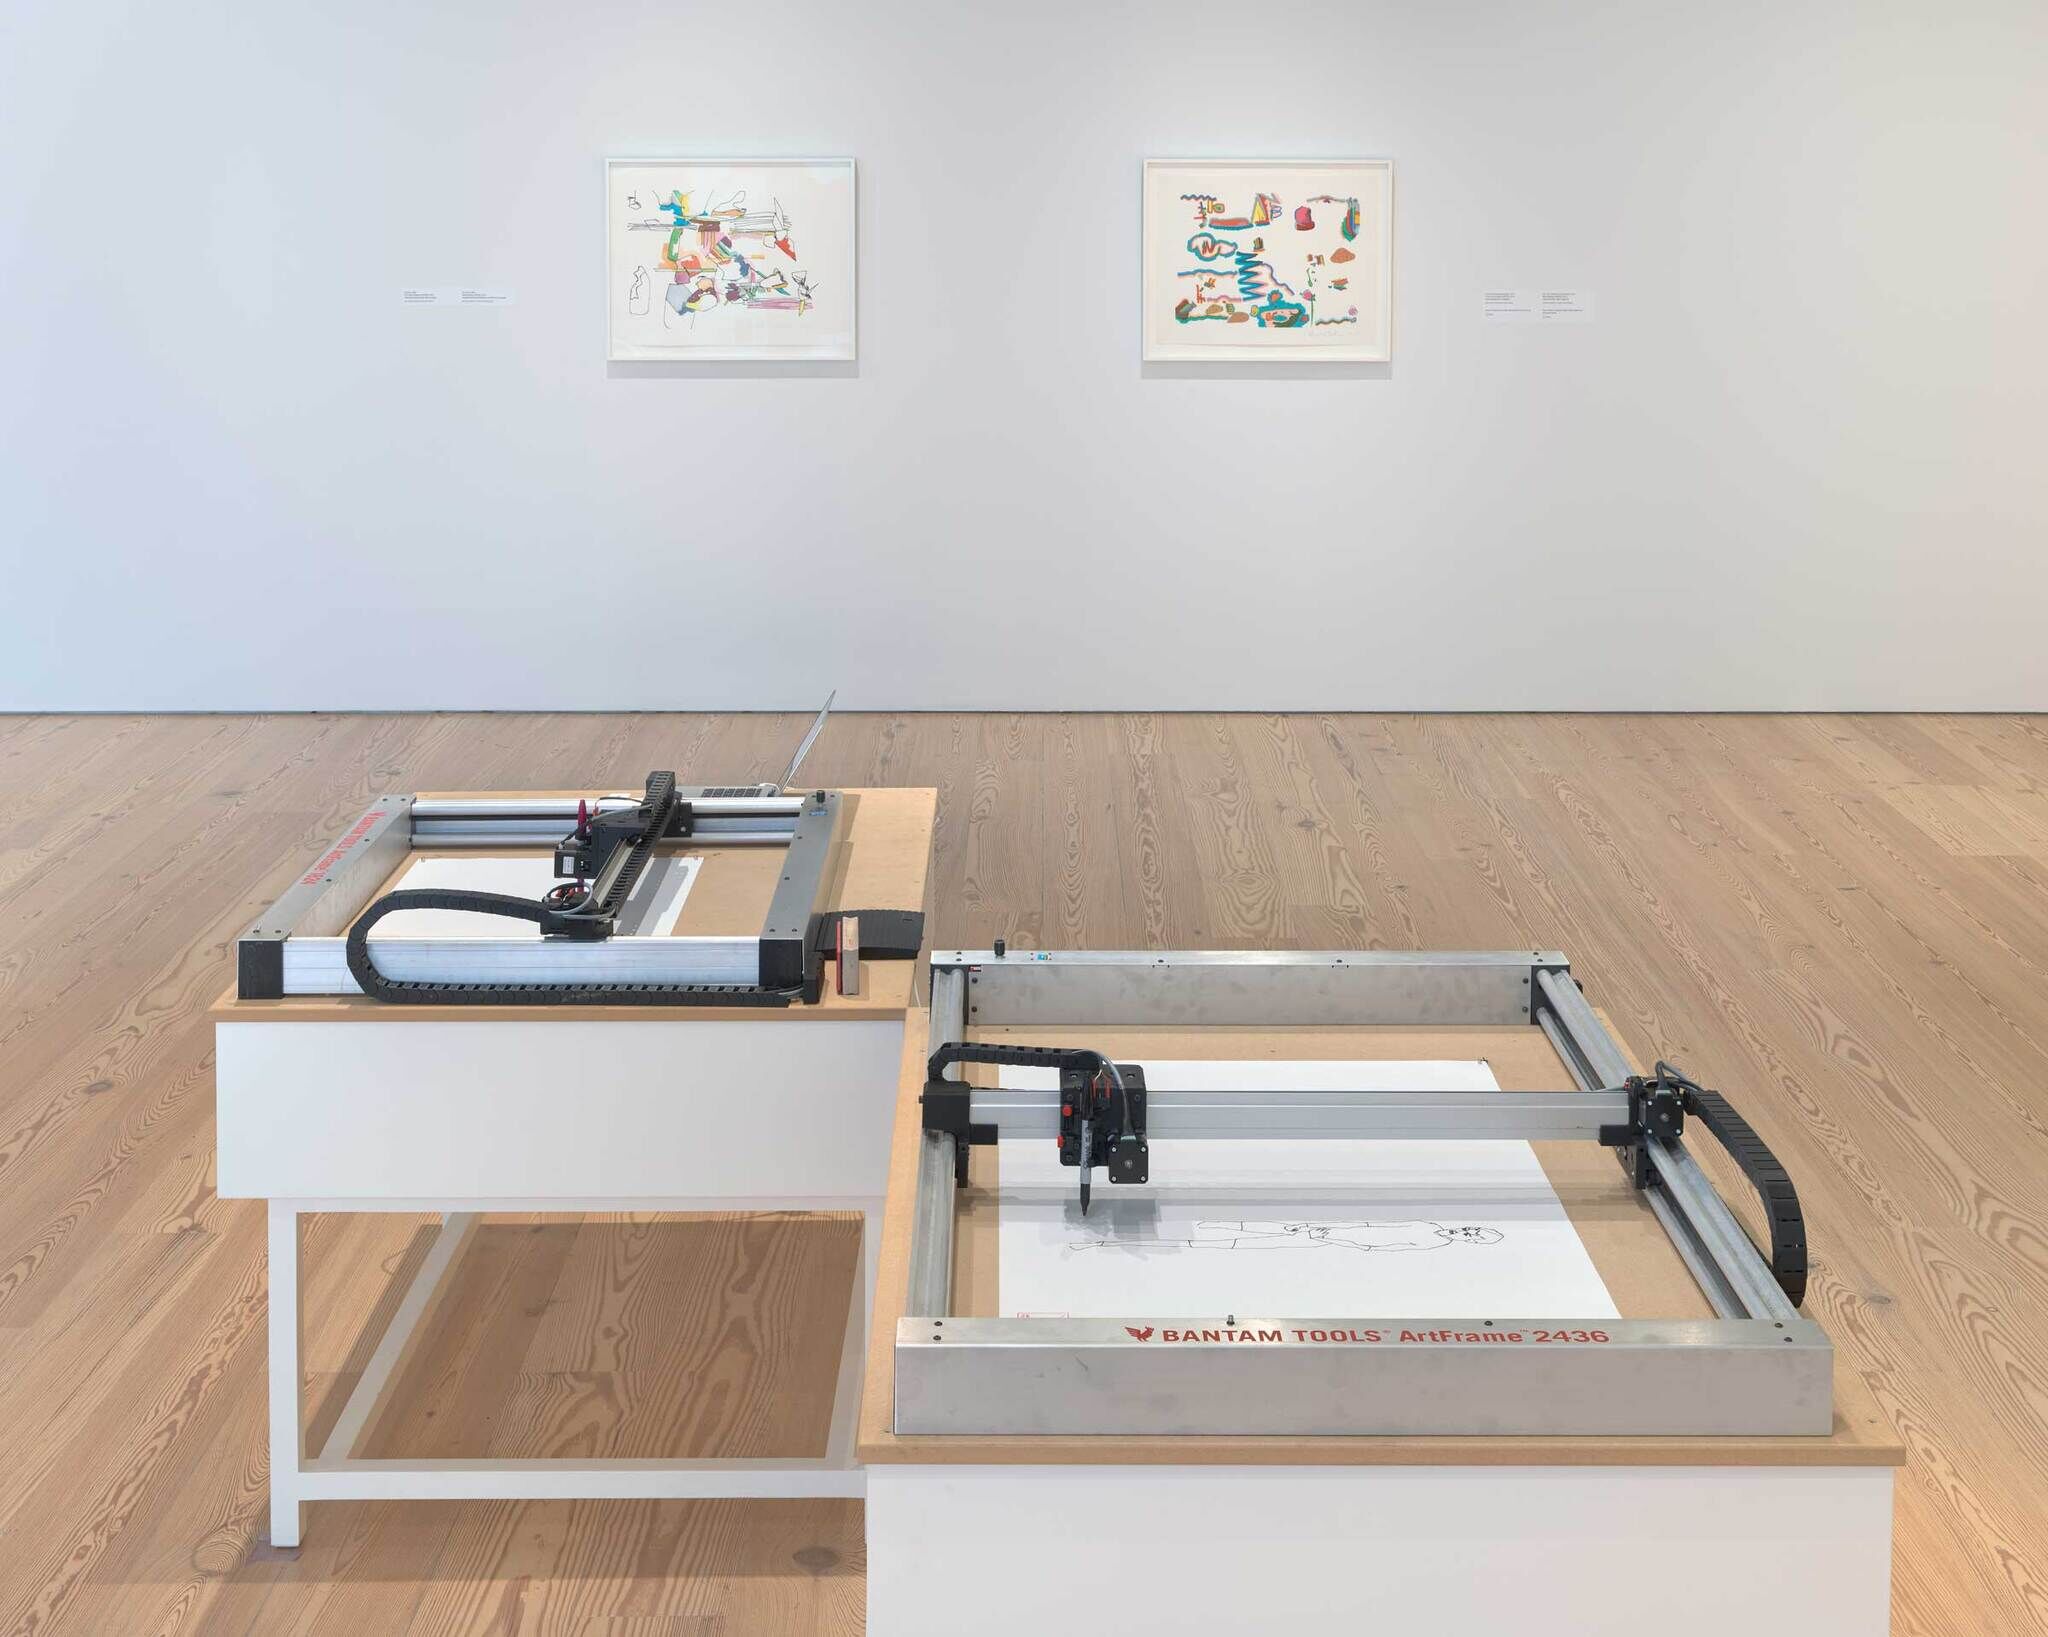 Active plotters drawing line images with black marker on display in an art gallery with framed artworks on the wall.